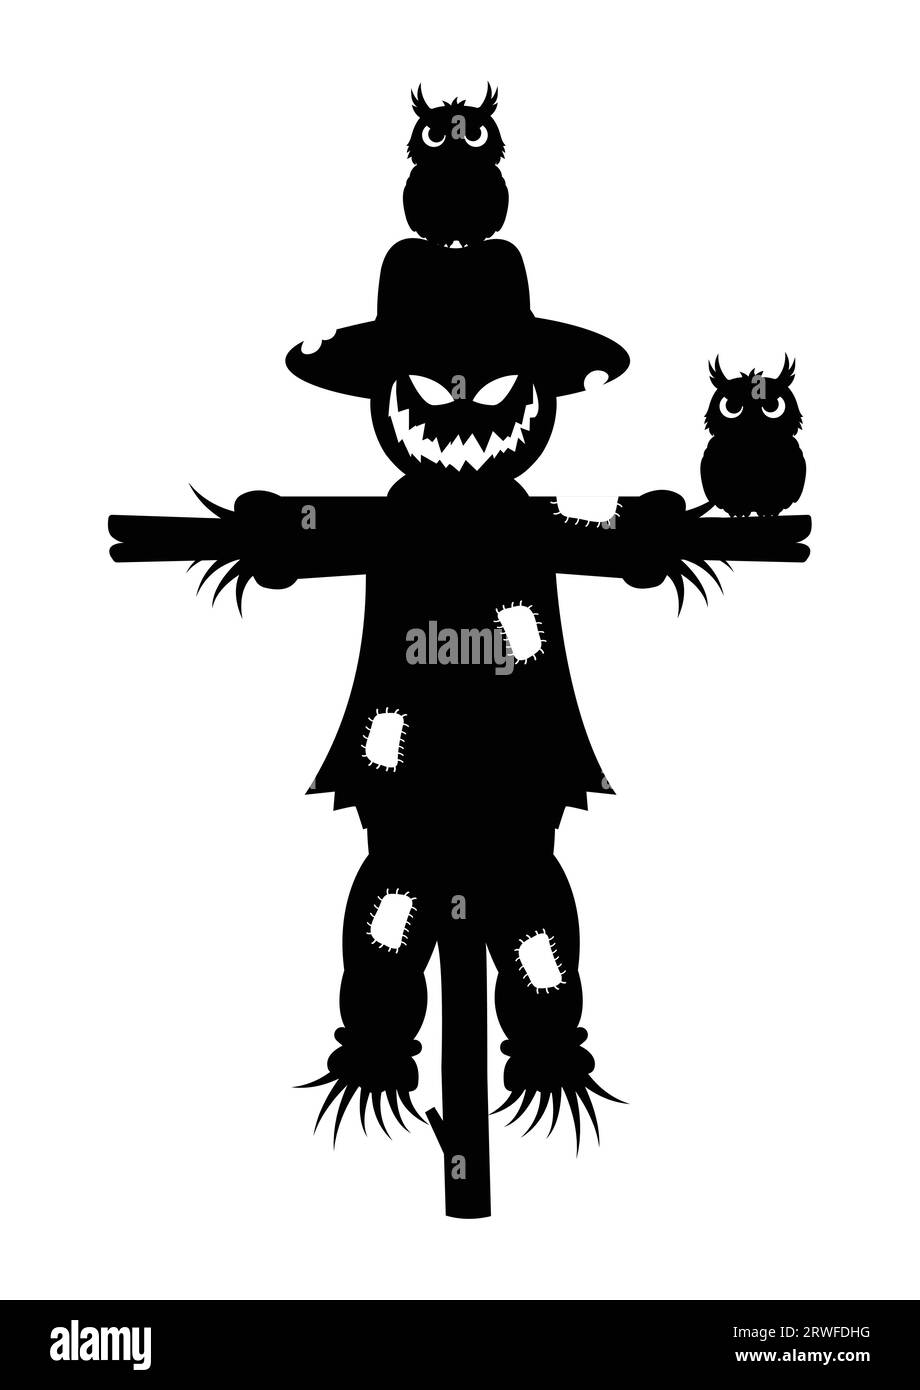 Scary halloween scarecrows with owl silhouette vector illustration Stock Vector